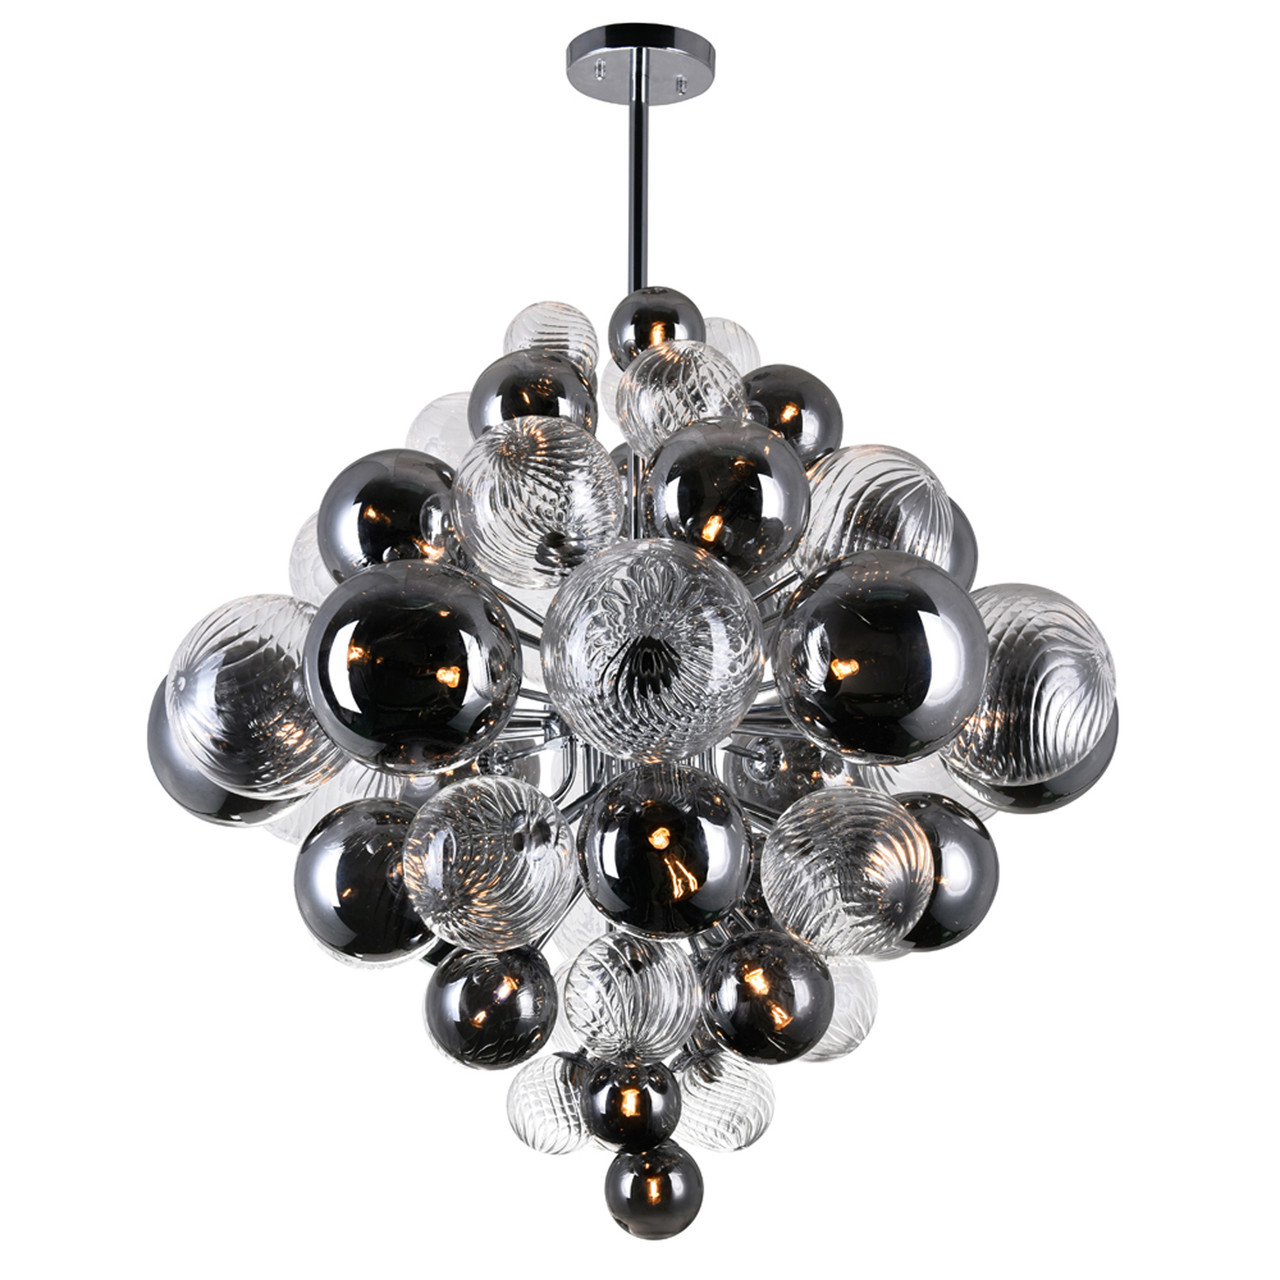 CWI LIGHTING 1205P36-27-601 27 Light Chandelier with Chrome Finish